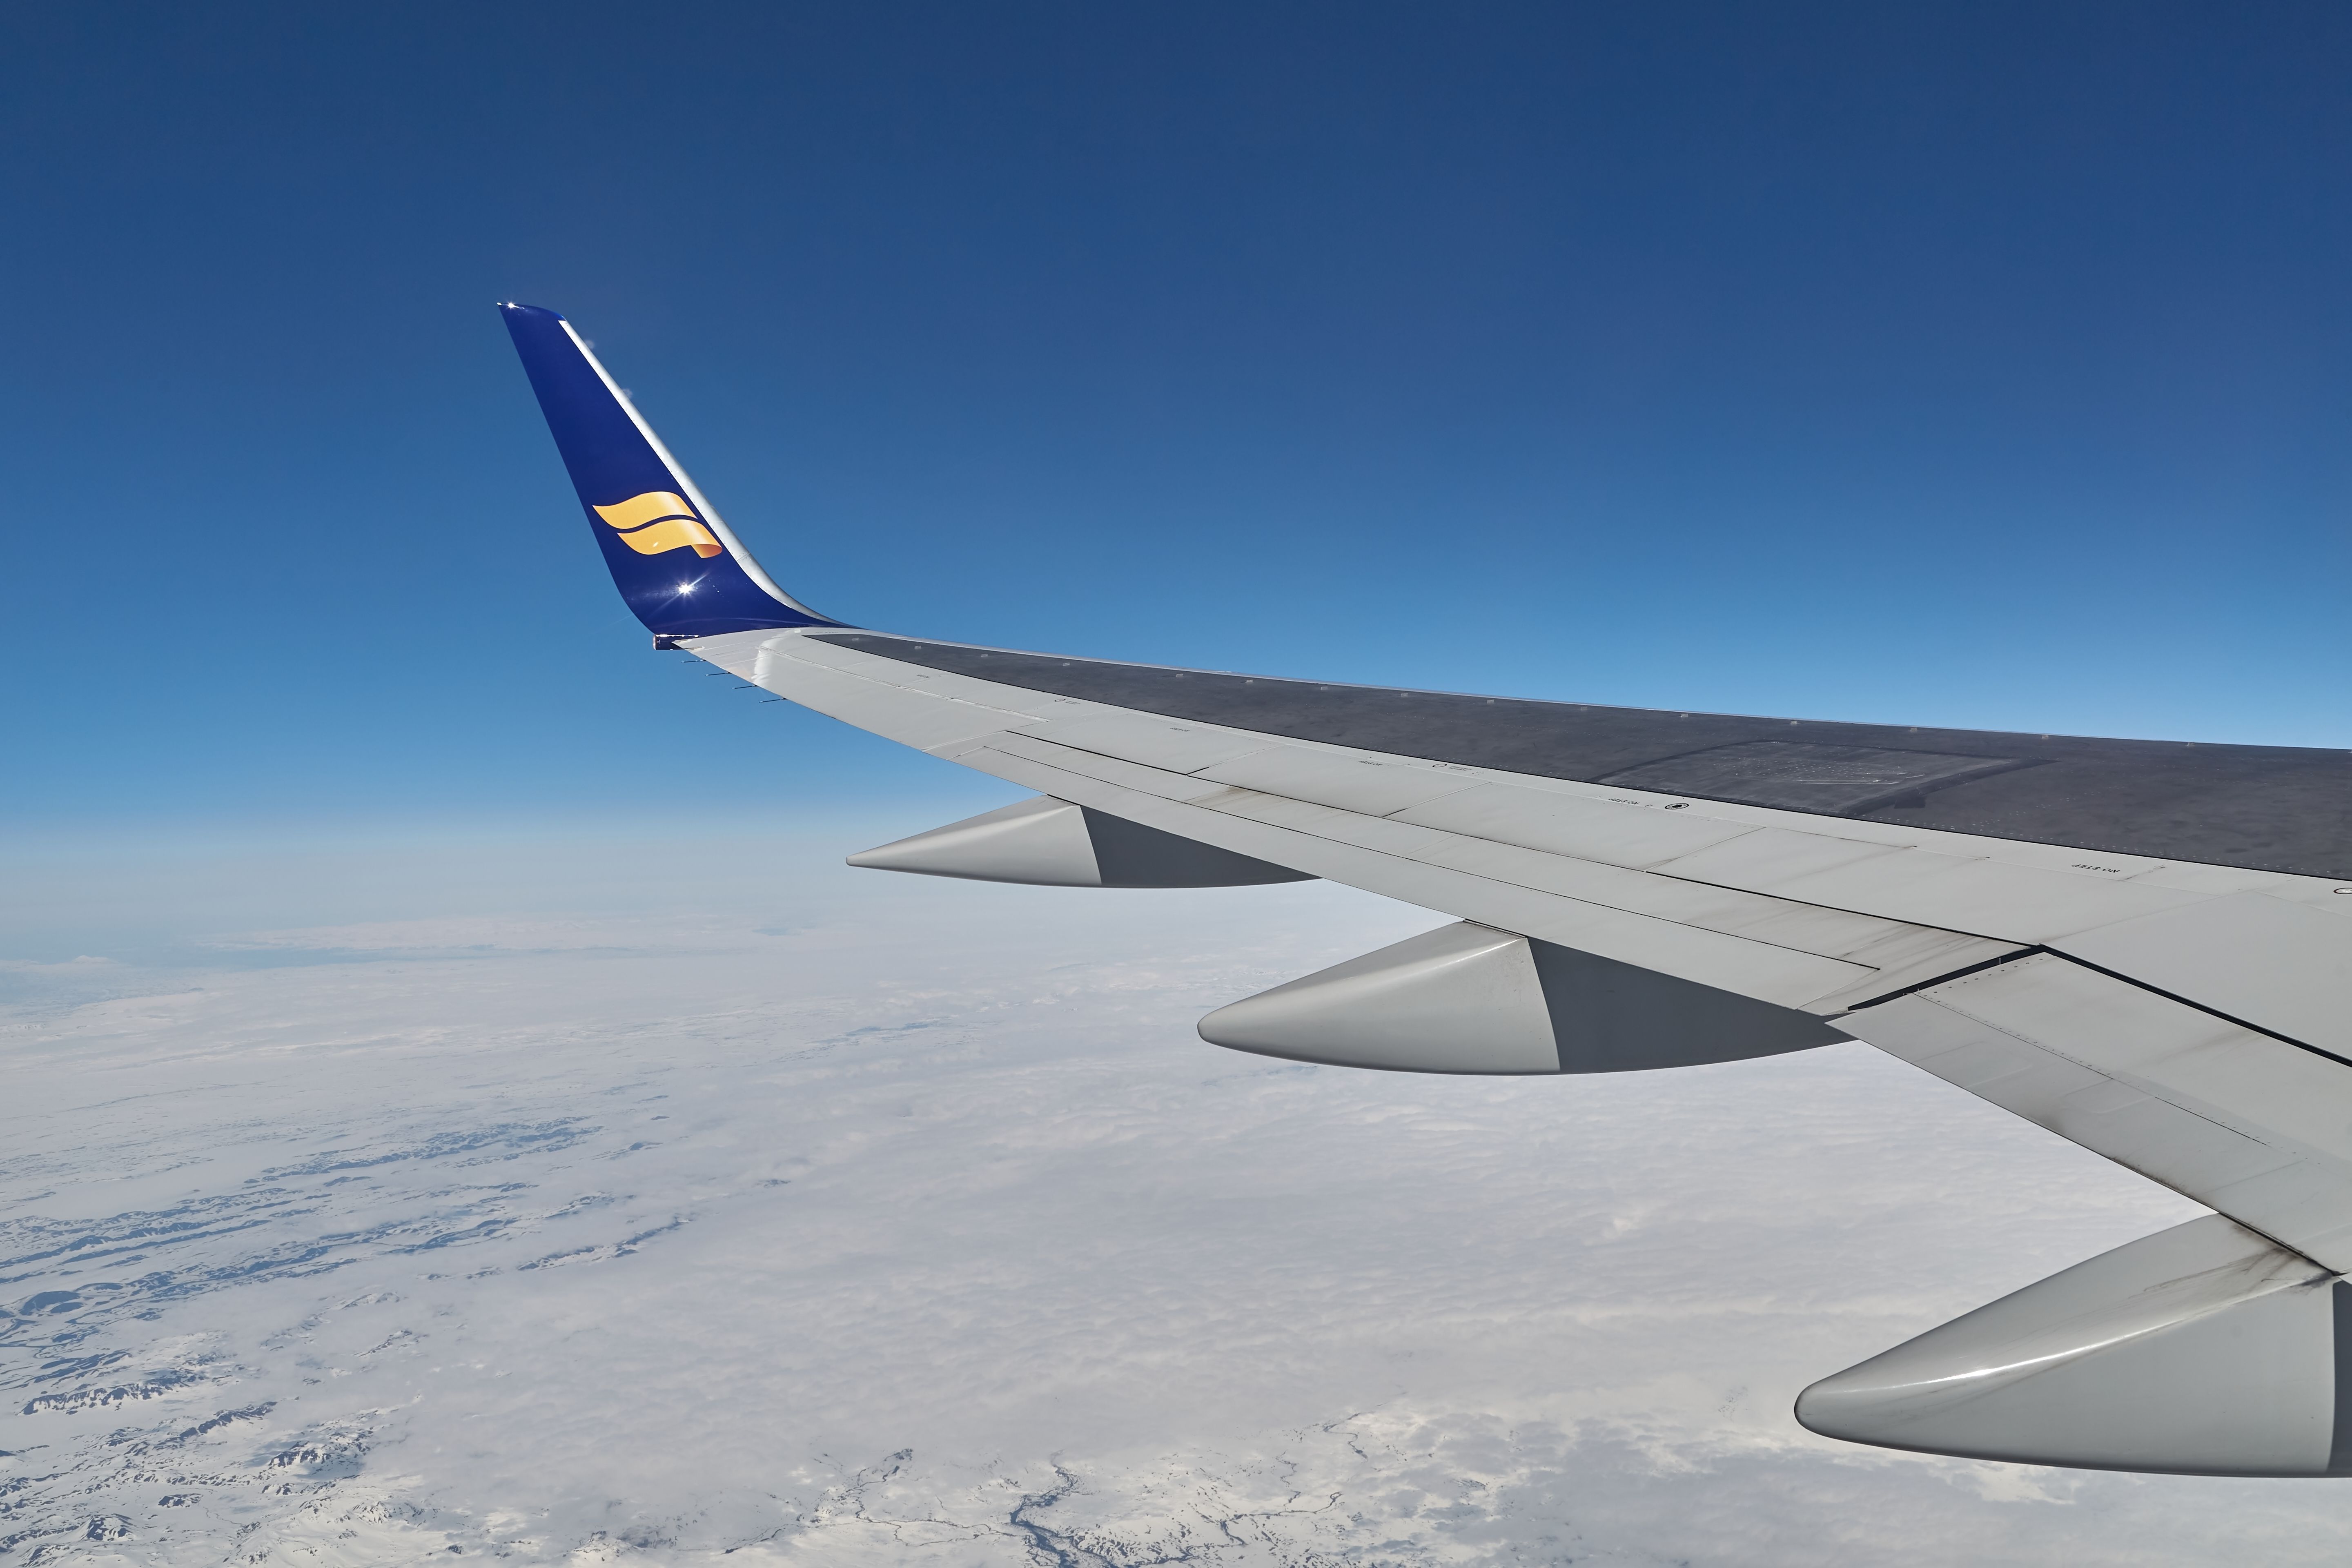 Reykjavik, Iceland - Circa 2018 Icelandair flight wingtip seen over cloud cover on a flight, looking out the window 